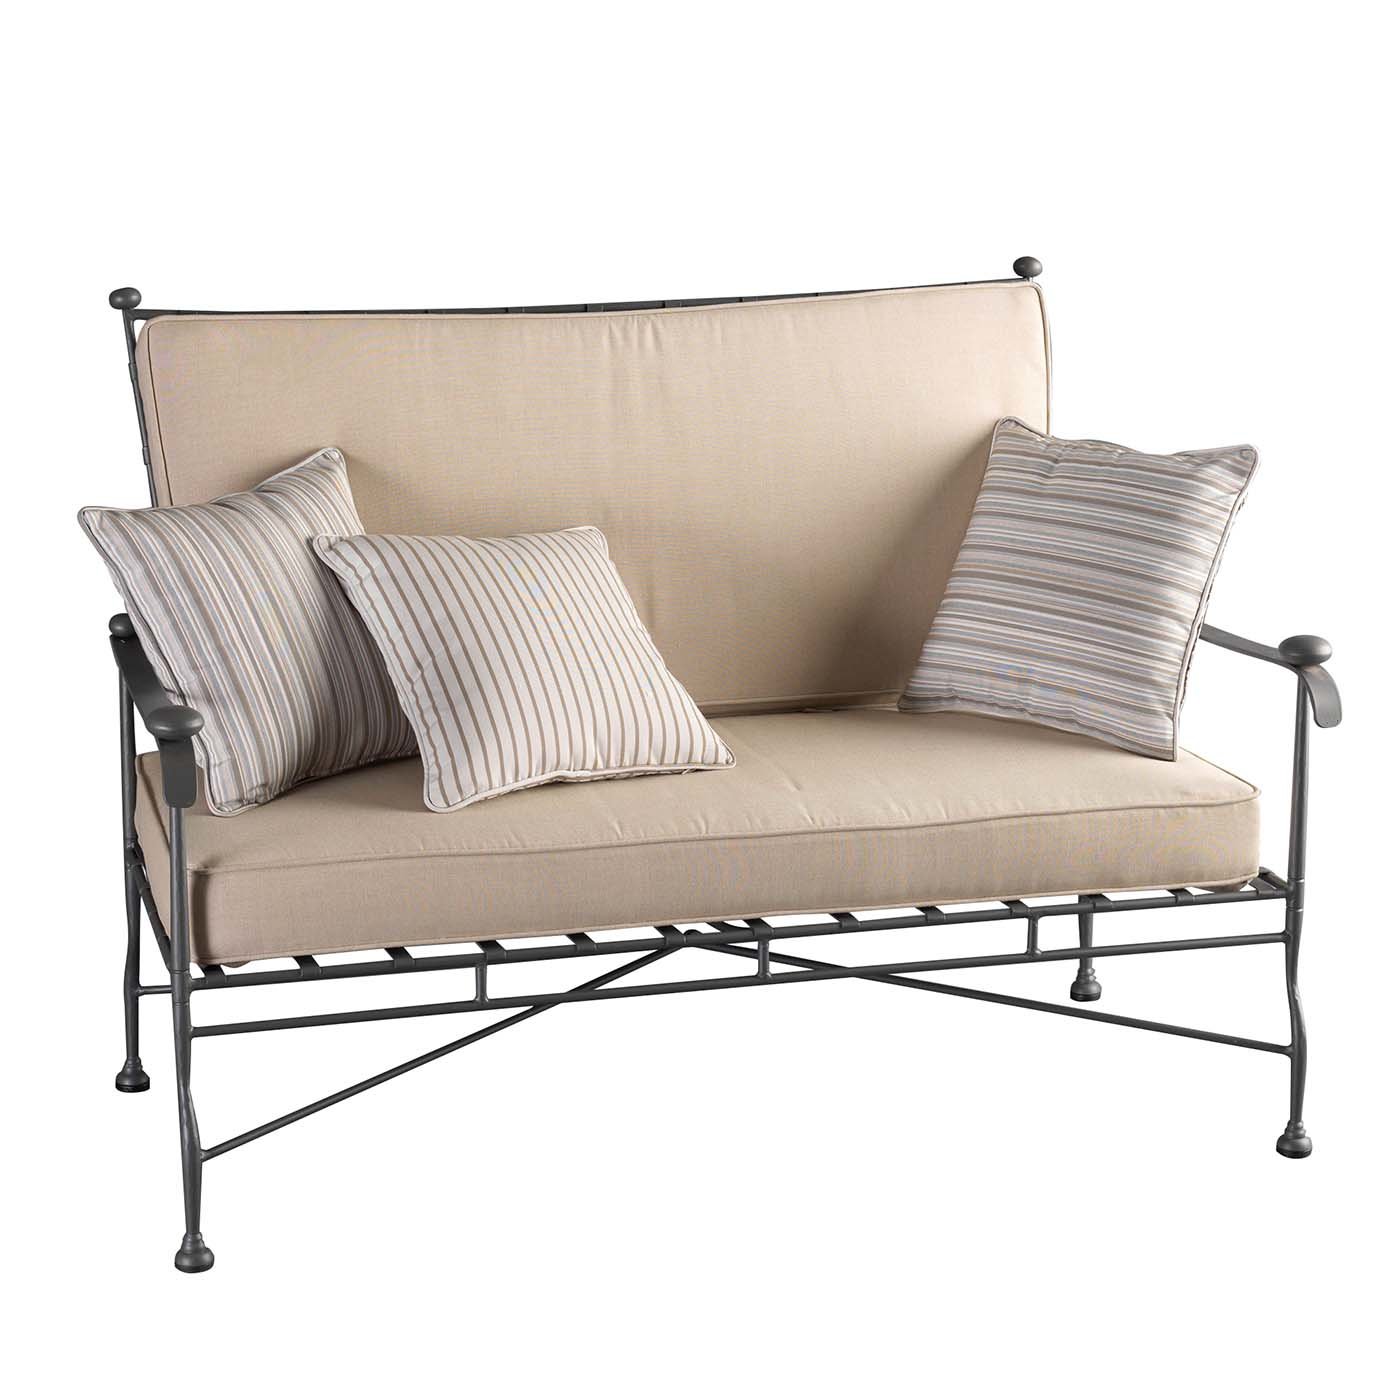 Intreccio Outdoor 2-Seater Sofa in Stainless Steel - Main view